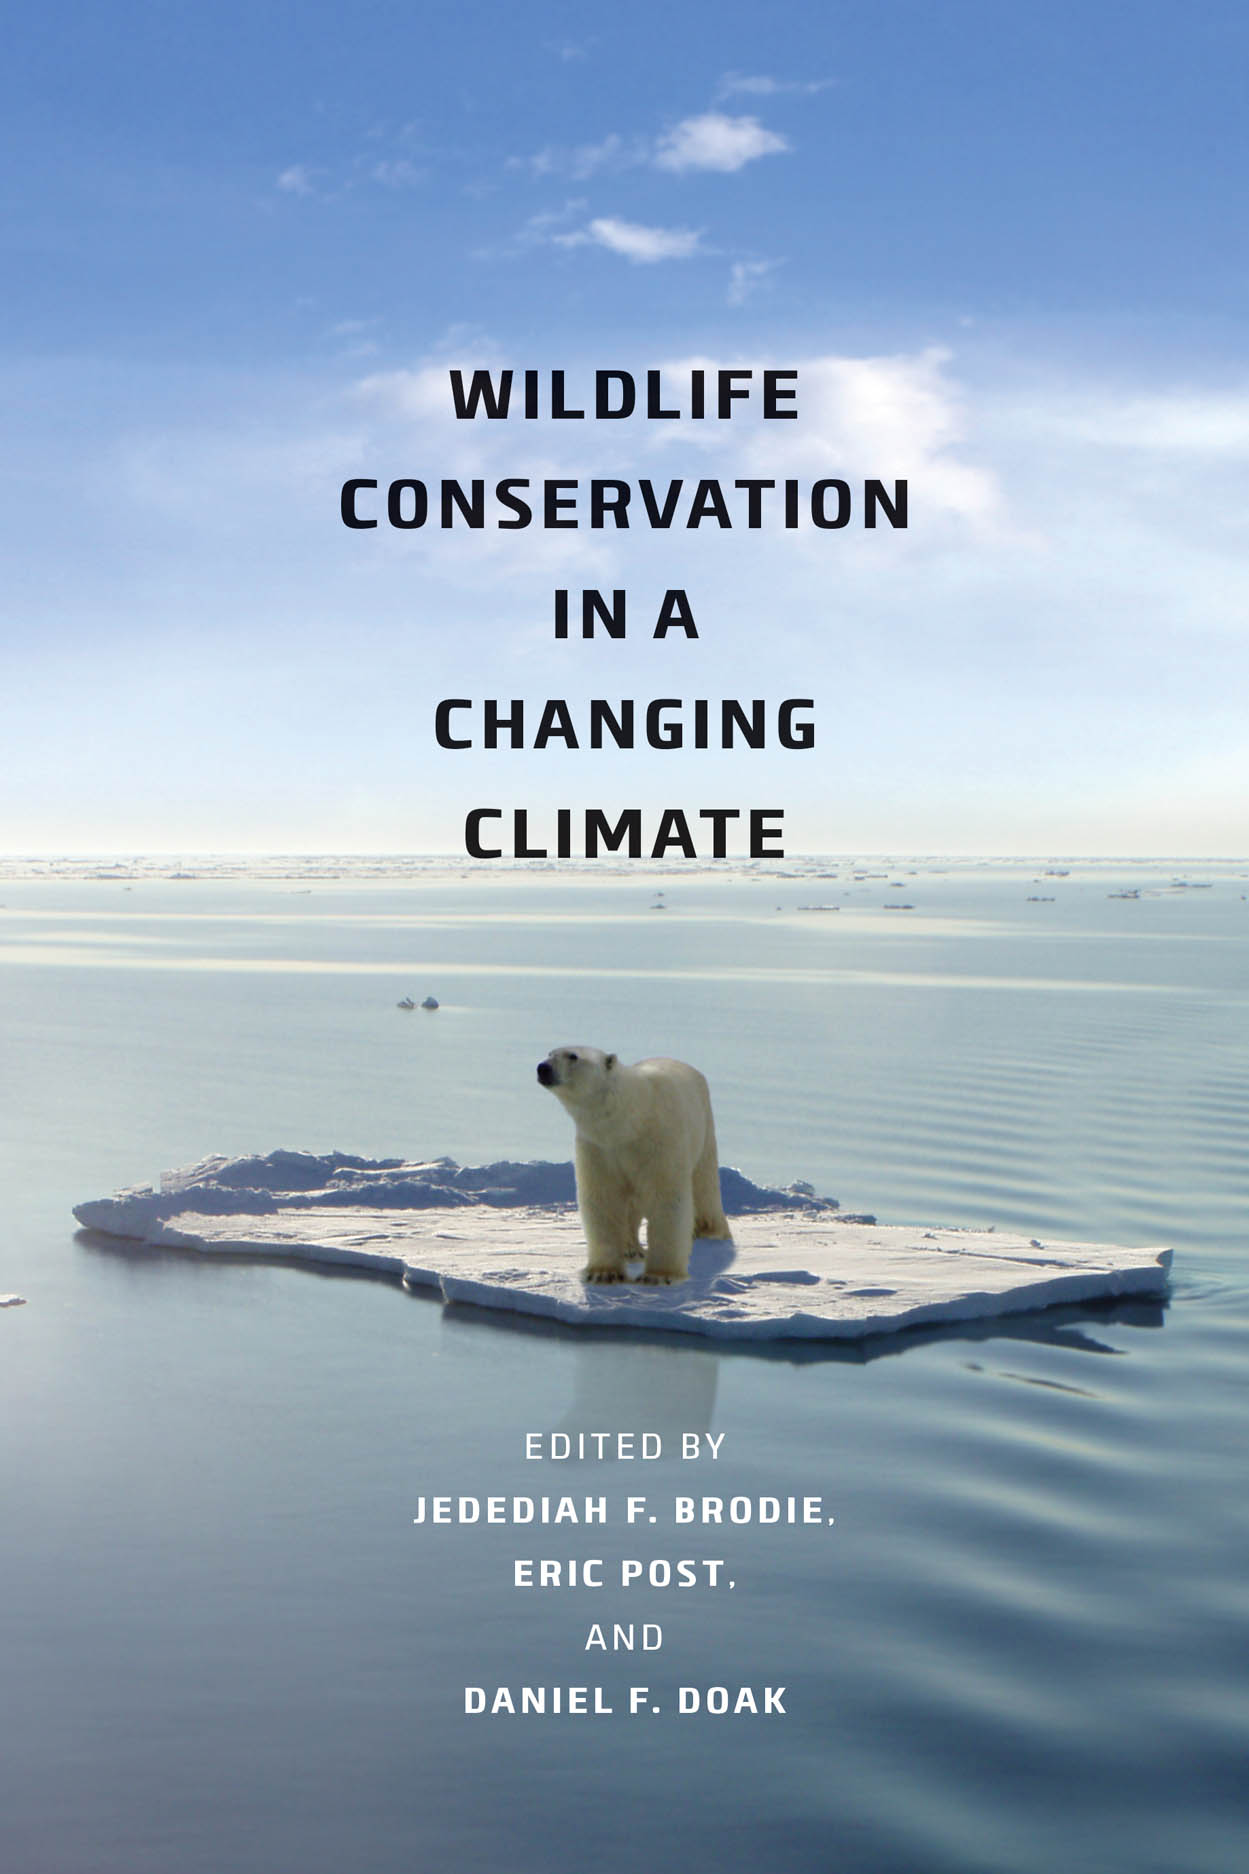 Wildlife Conservation in a Changing Climate, Brodie, Post, Doak